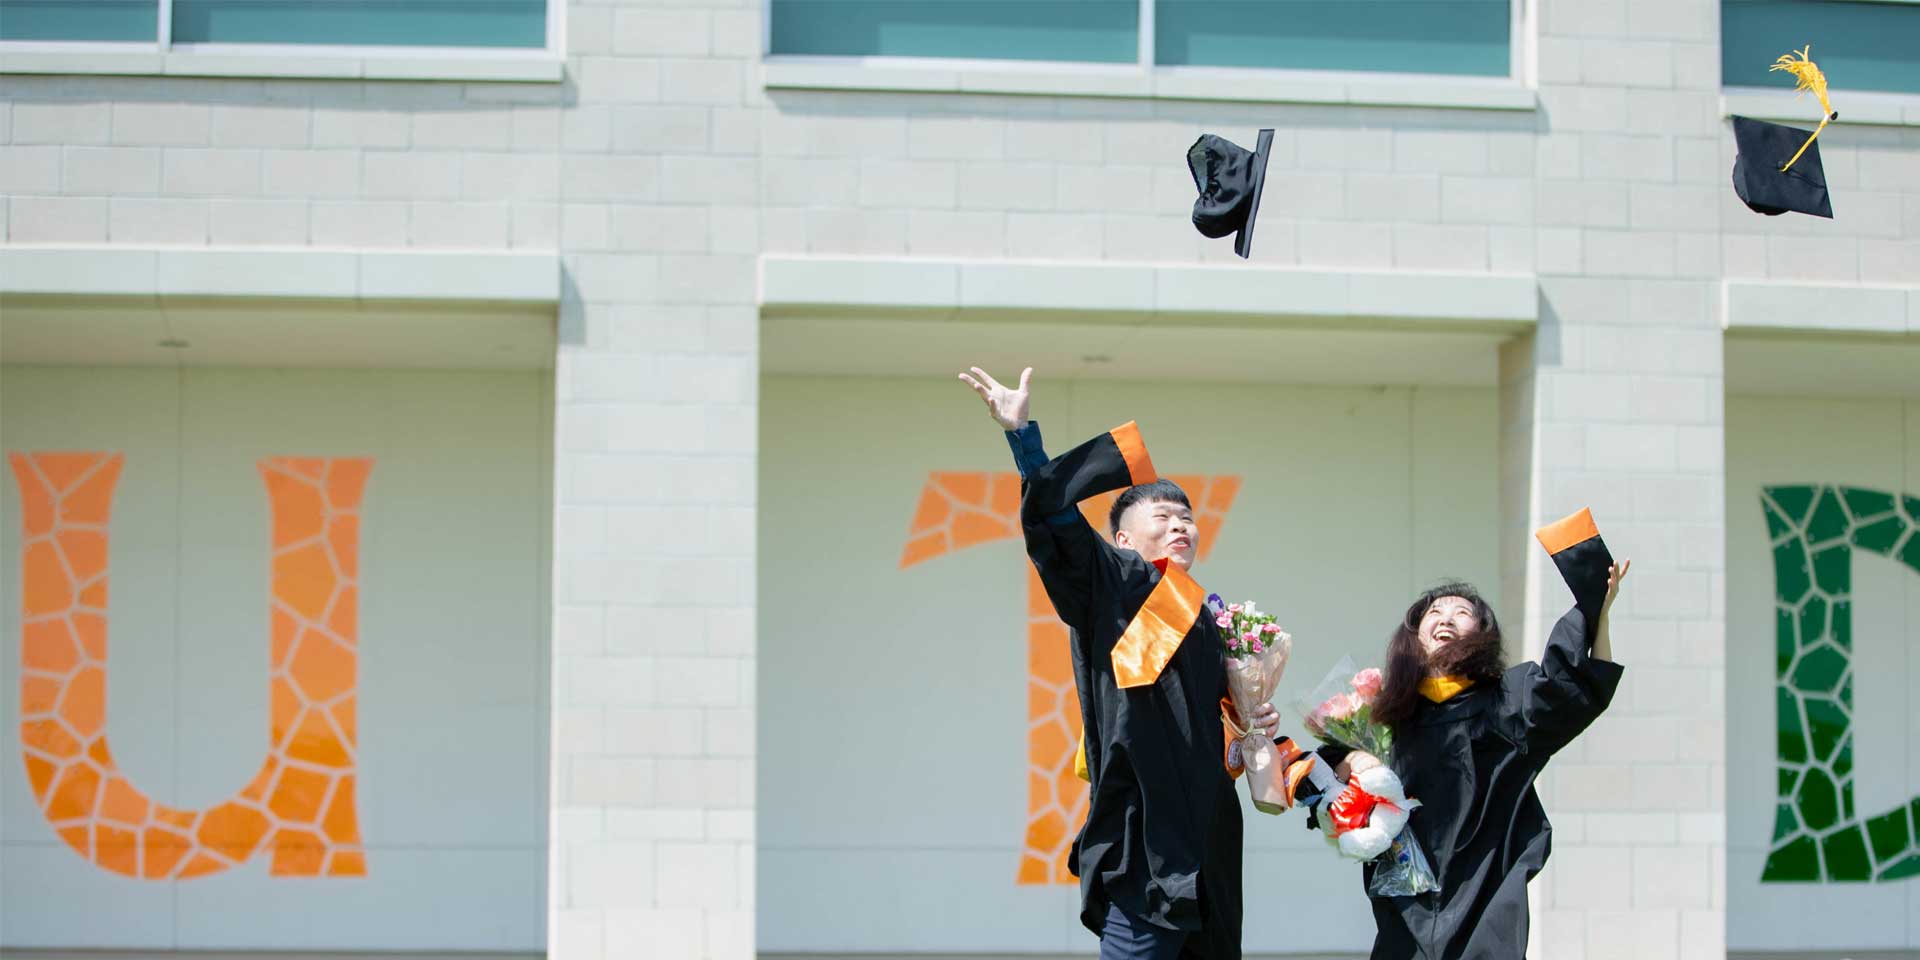 A master's degree in business administration graduate and a master's degree in supply chain management graduate celebrating on commencement day.